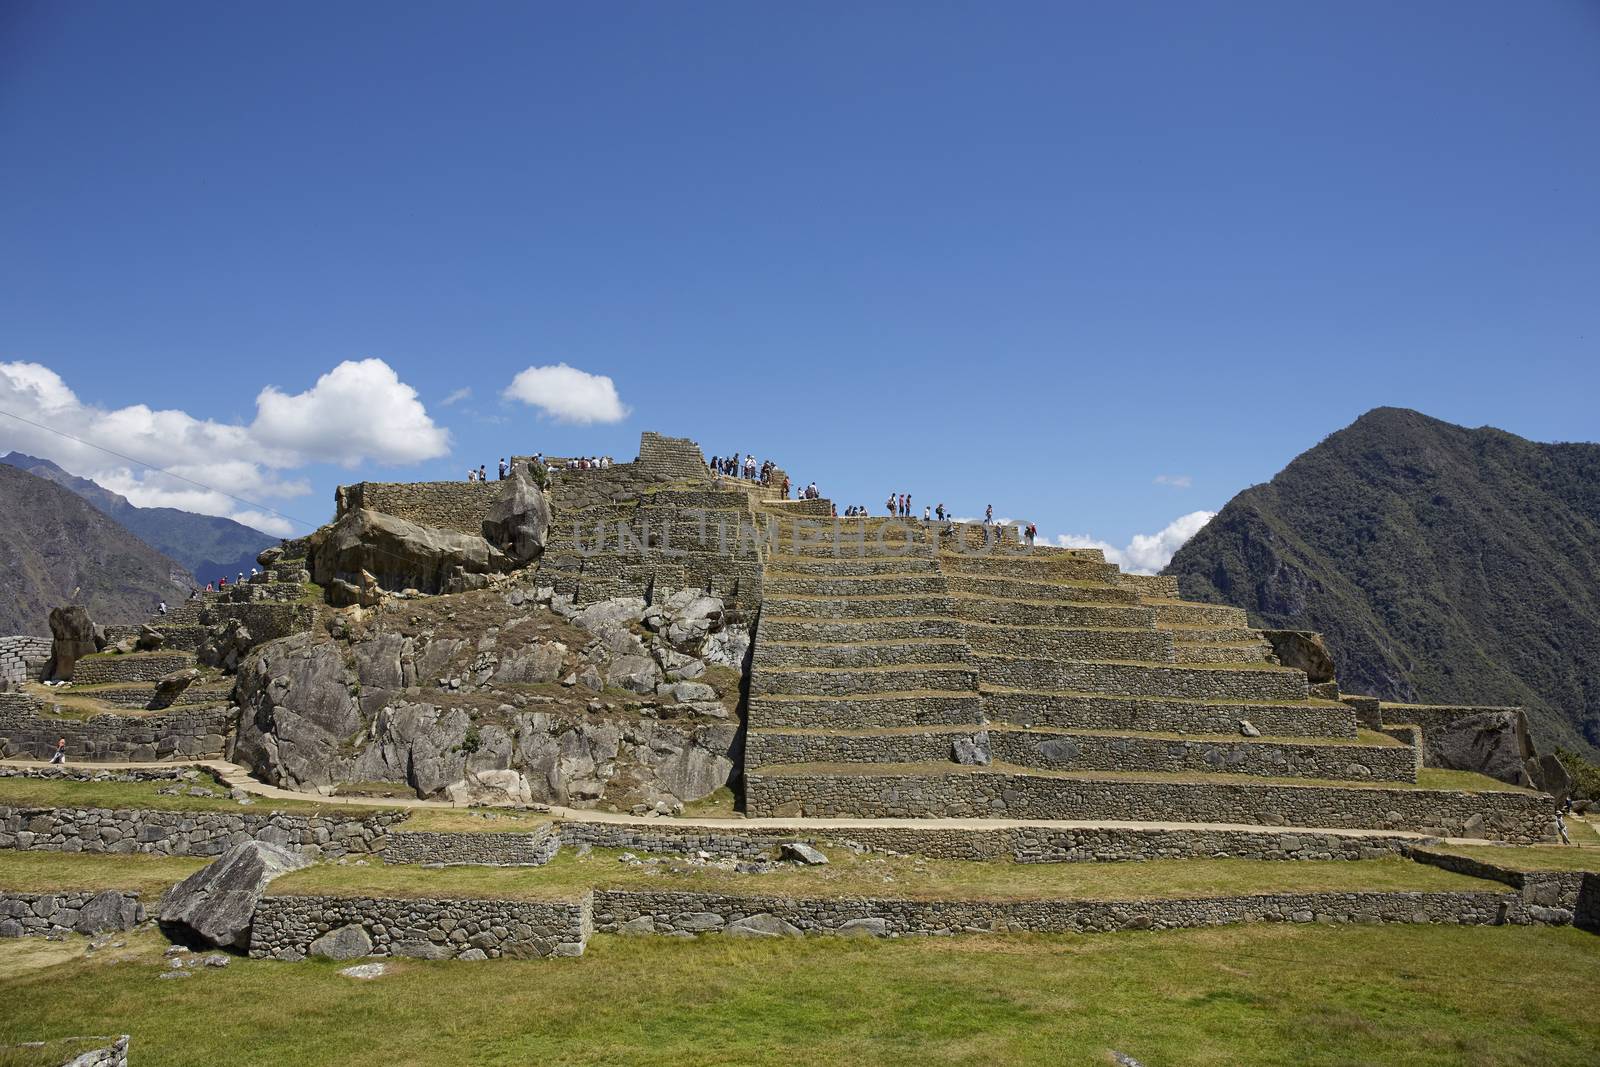 View of Machu Pichhu on a sunny afternoon by Tjeerdkruse